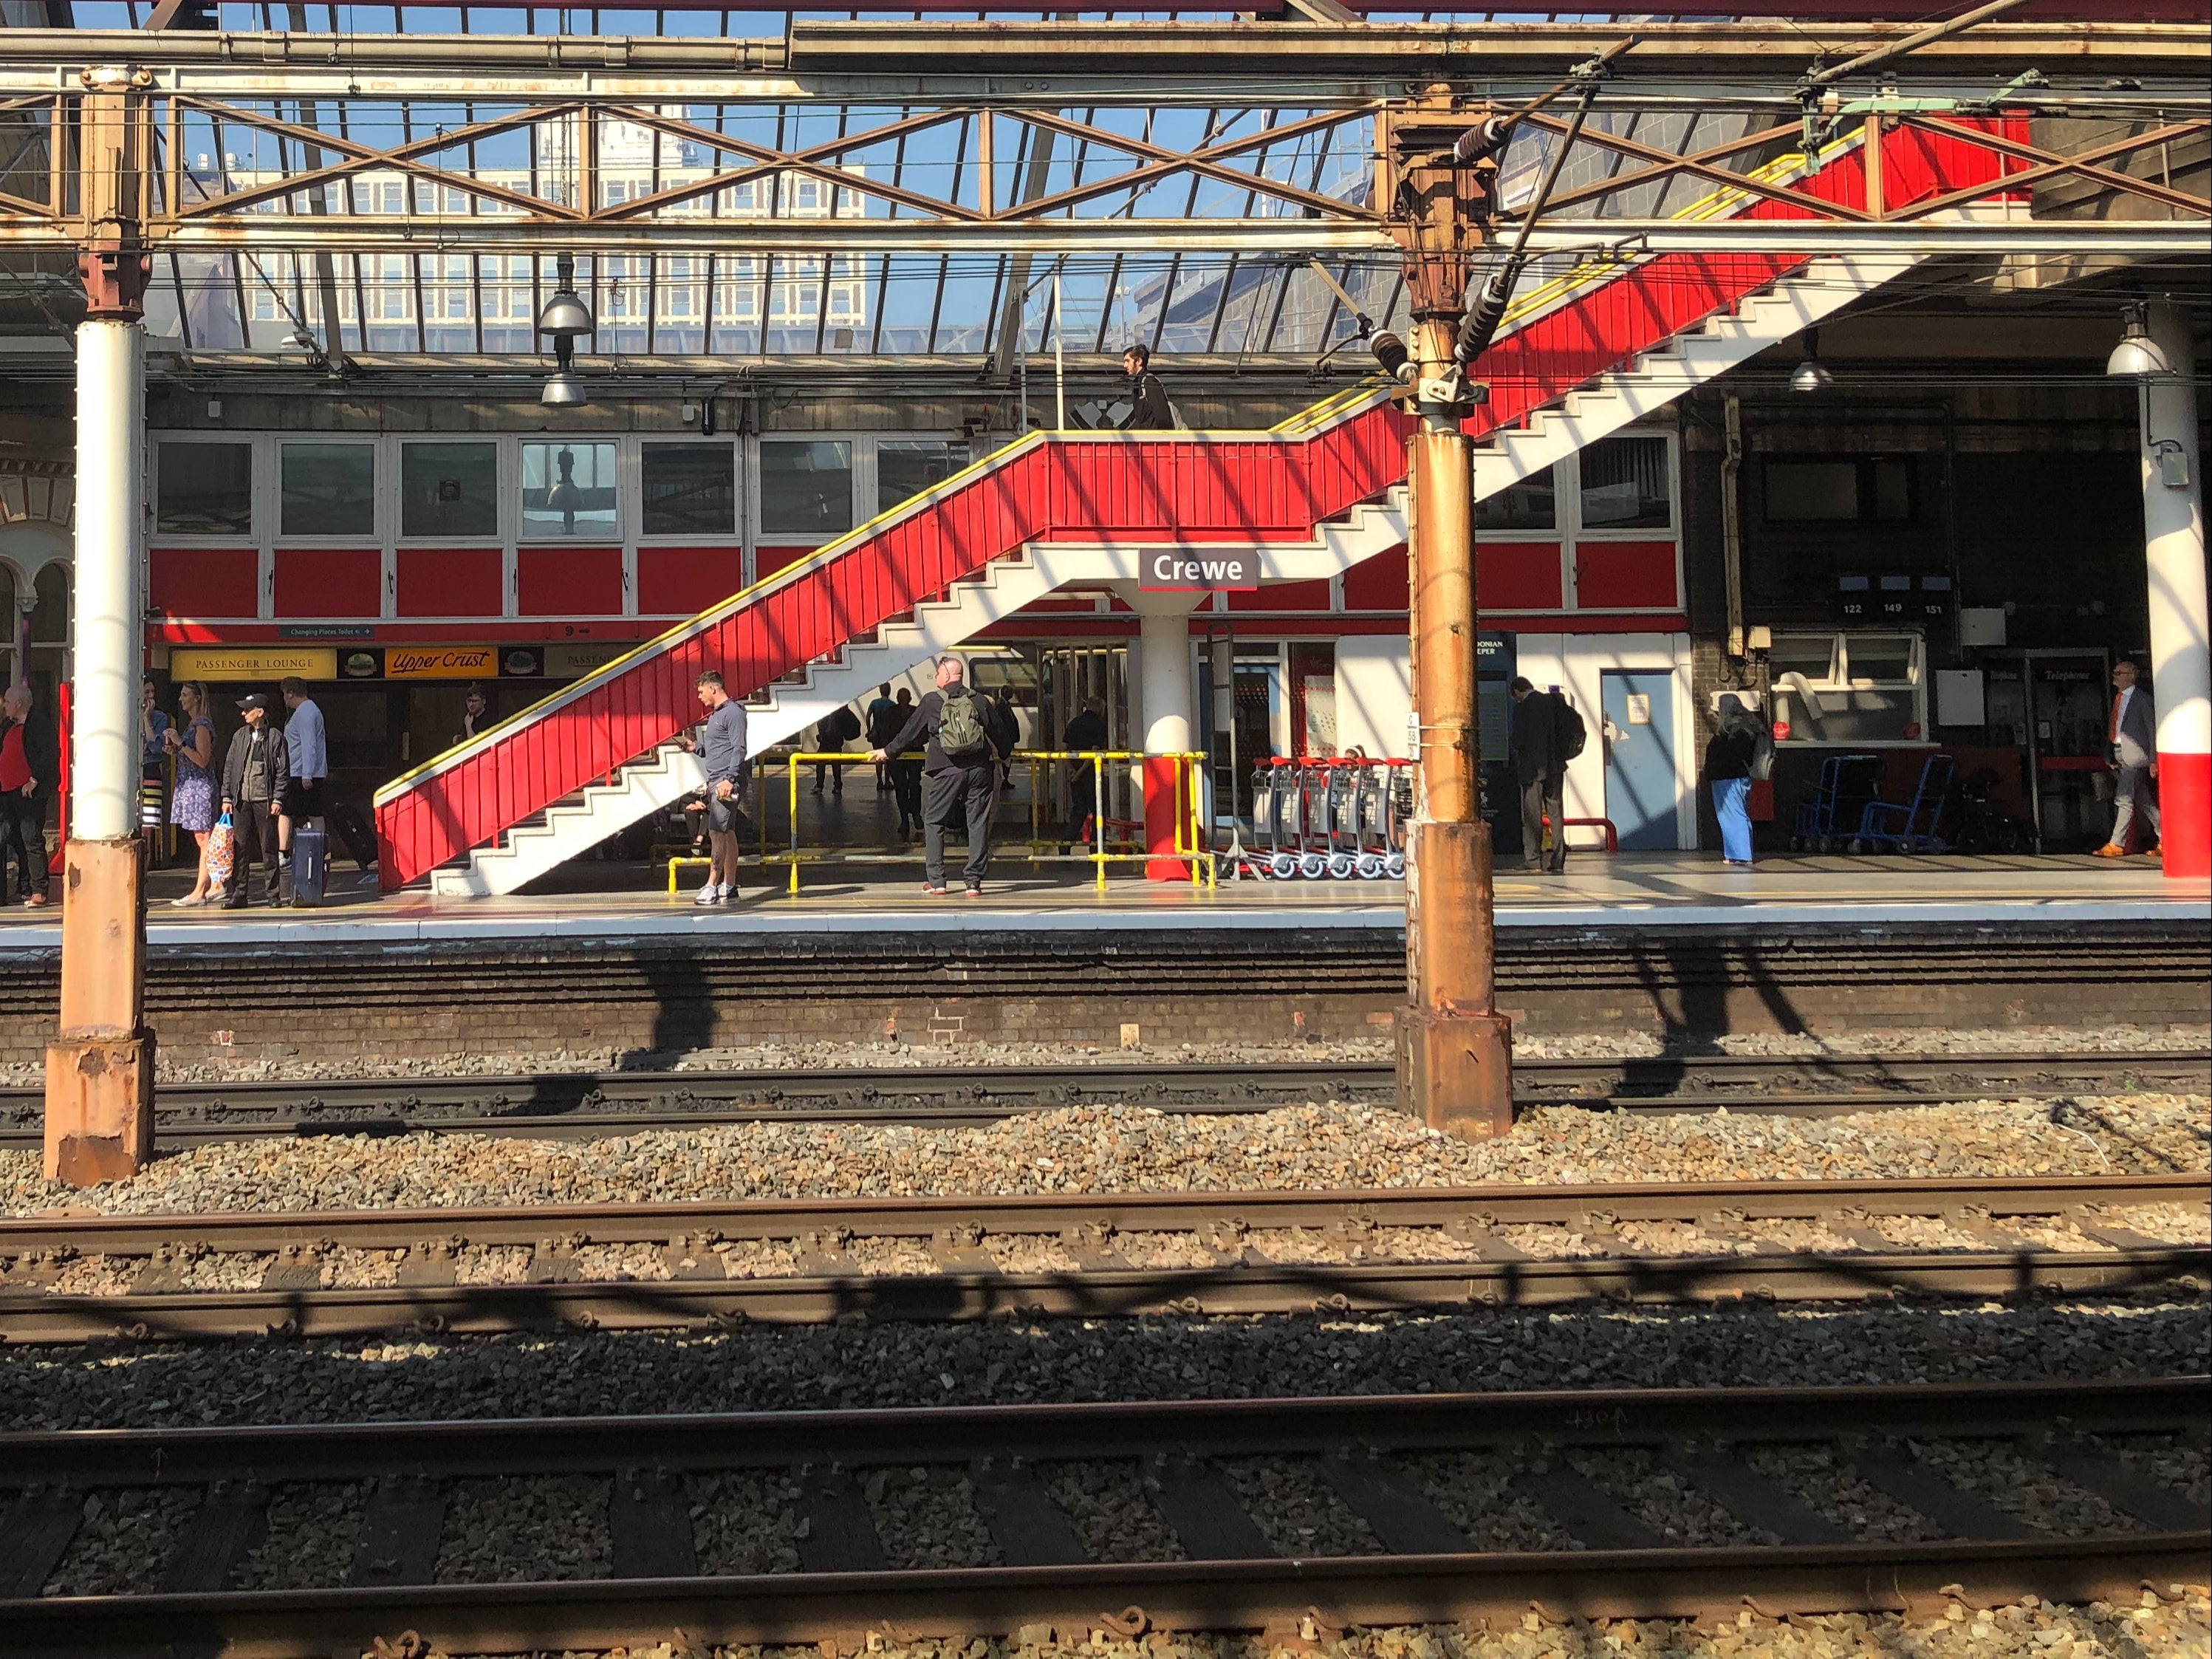 Well connected: Crewe station in Cheshire